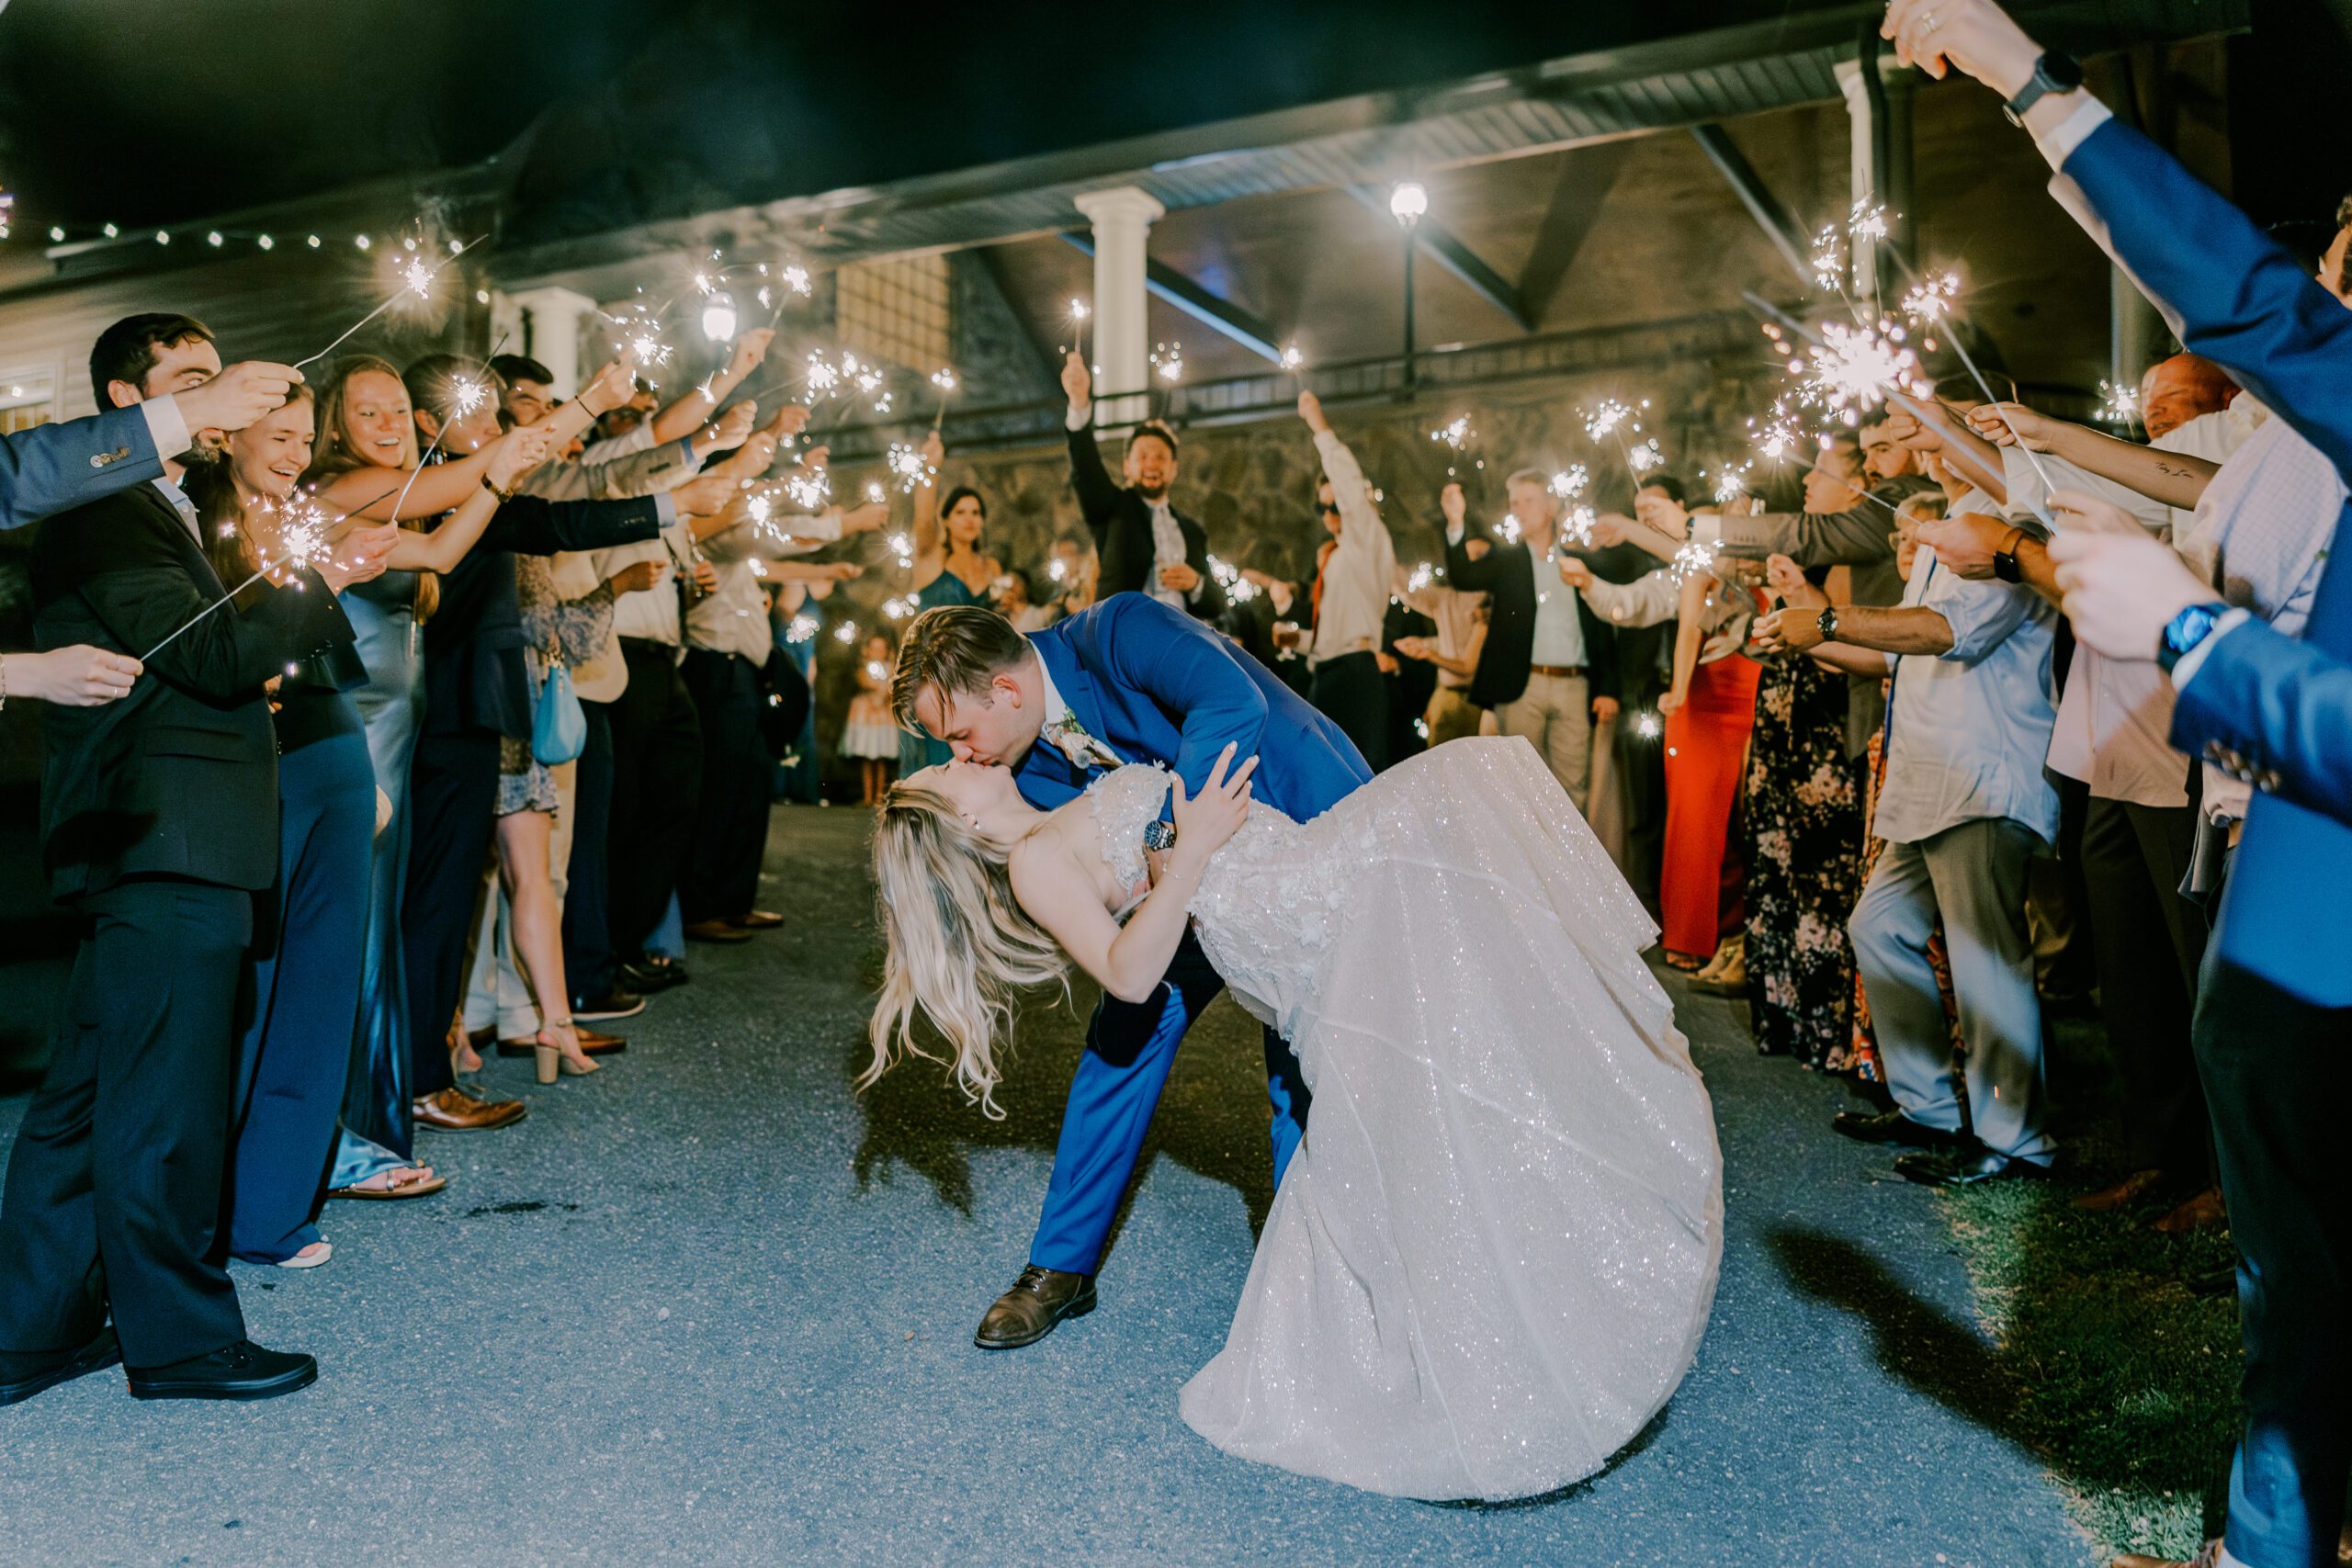 Groom dips bride in a kiss as they exit their wedding, guests surrounding them holding up sparklers and cheering them on